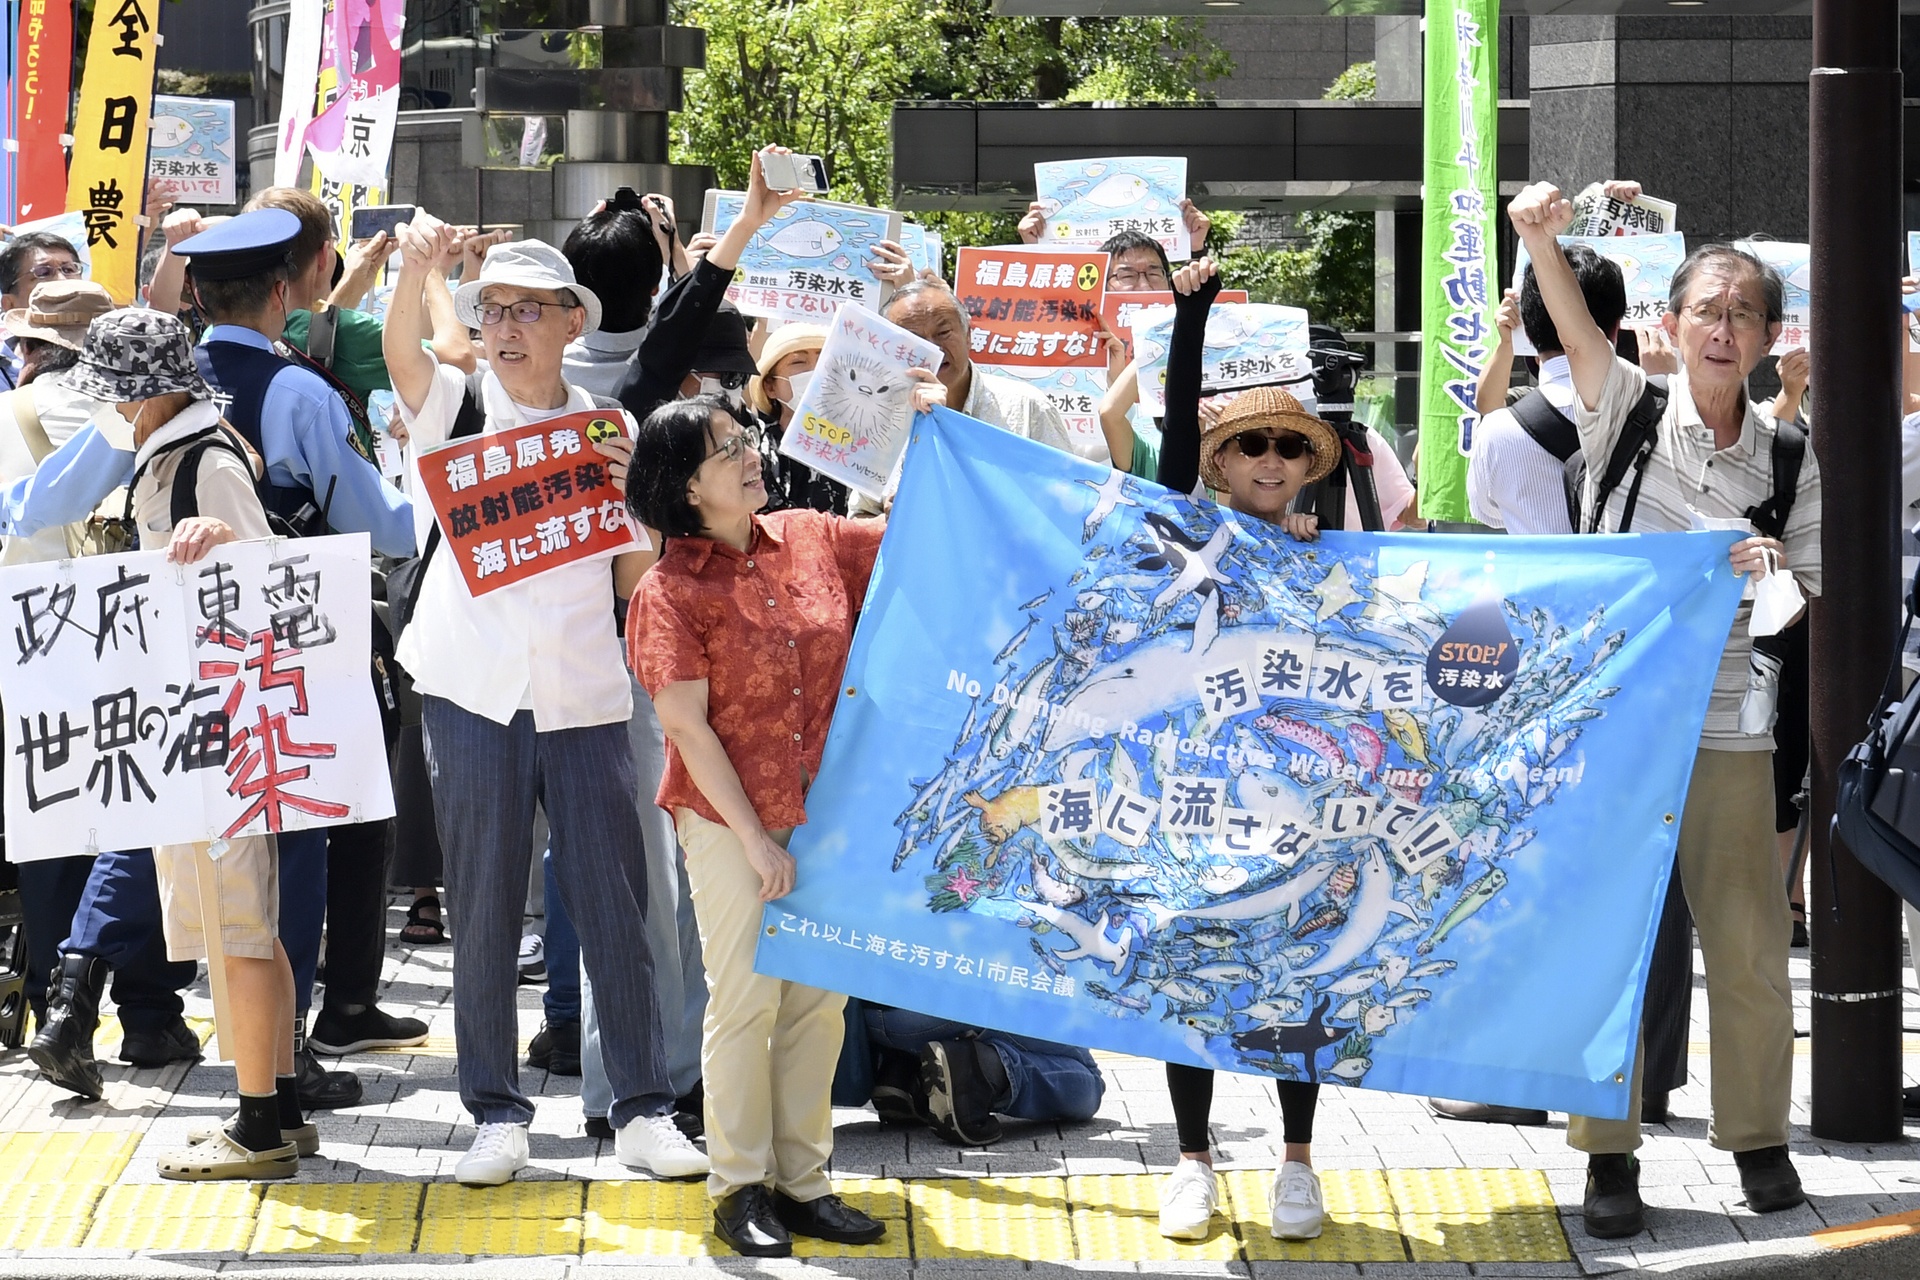 A protester holds a sign during a rally against the treated radioactive water release from the damaged Fukushima nuclear power plant, in front of TEPCO headquarters in Tokyo.